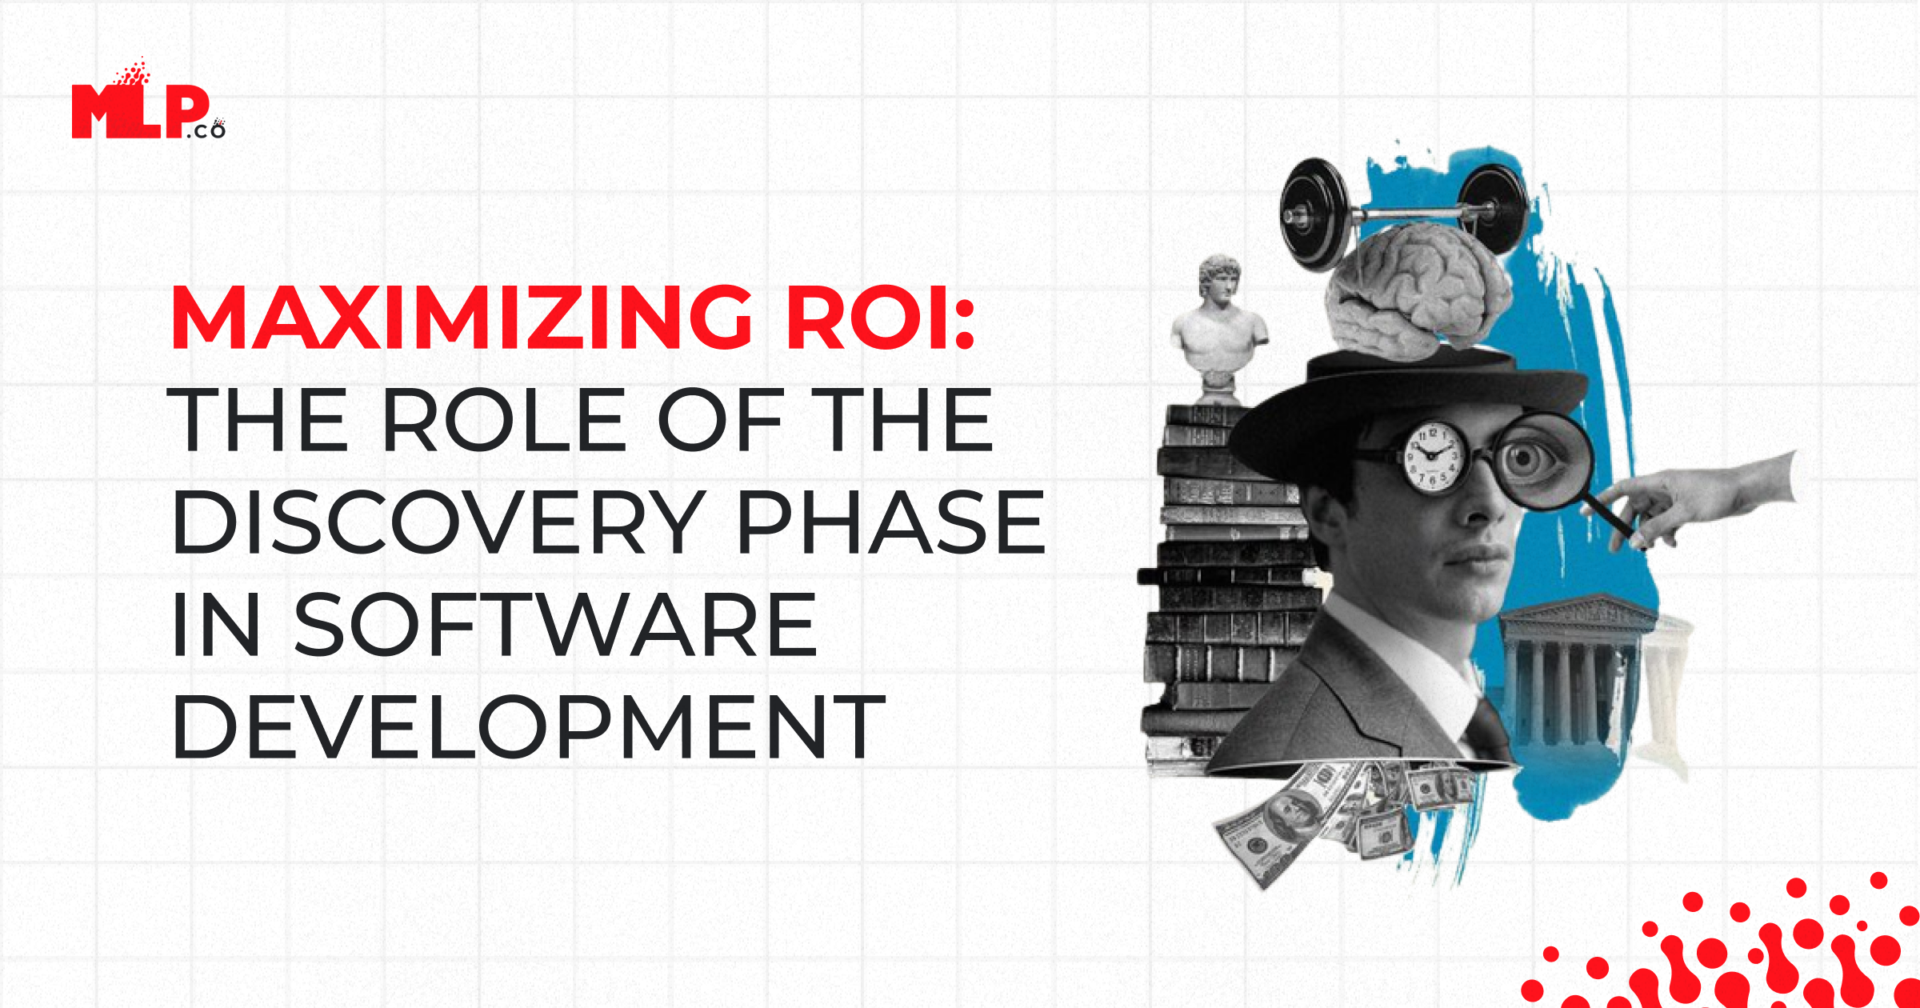 Maximizing ROI: The Role of the Discovery Phase in Software Development